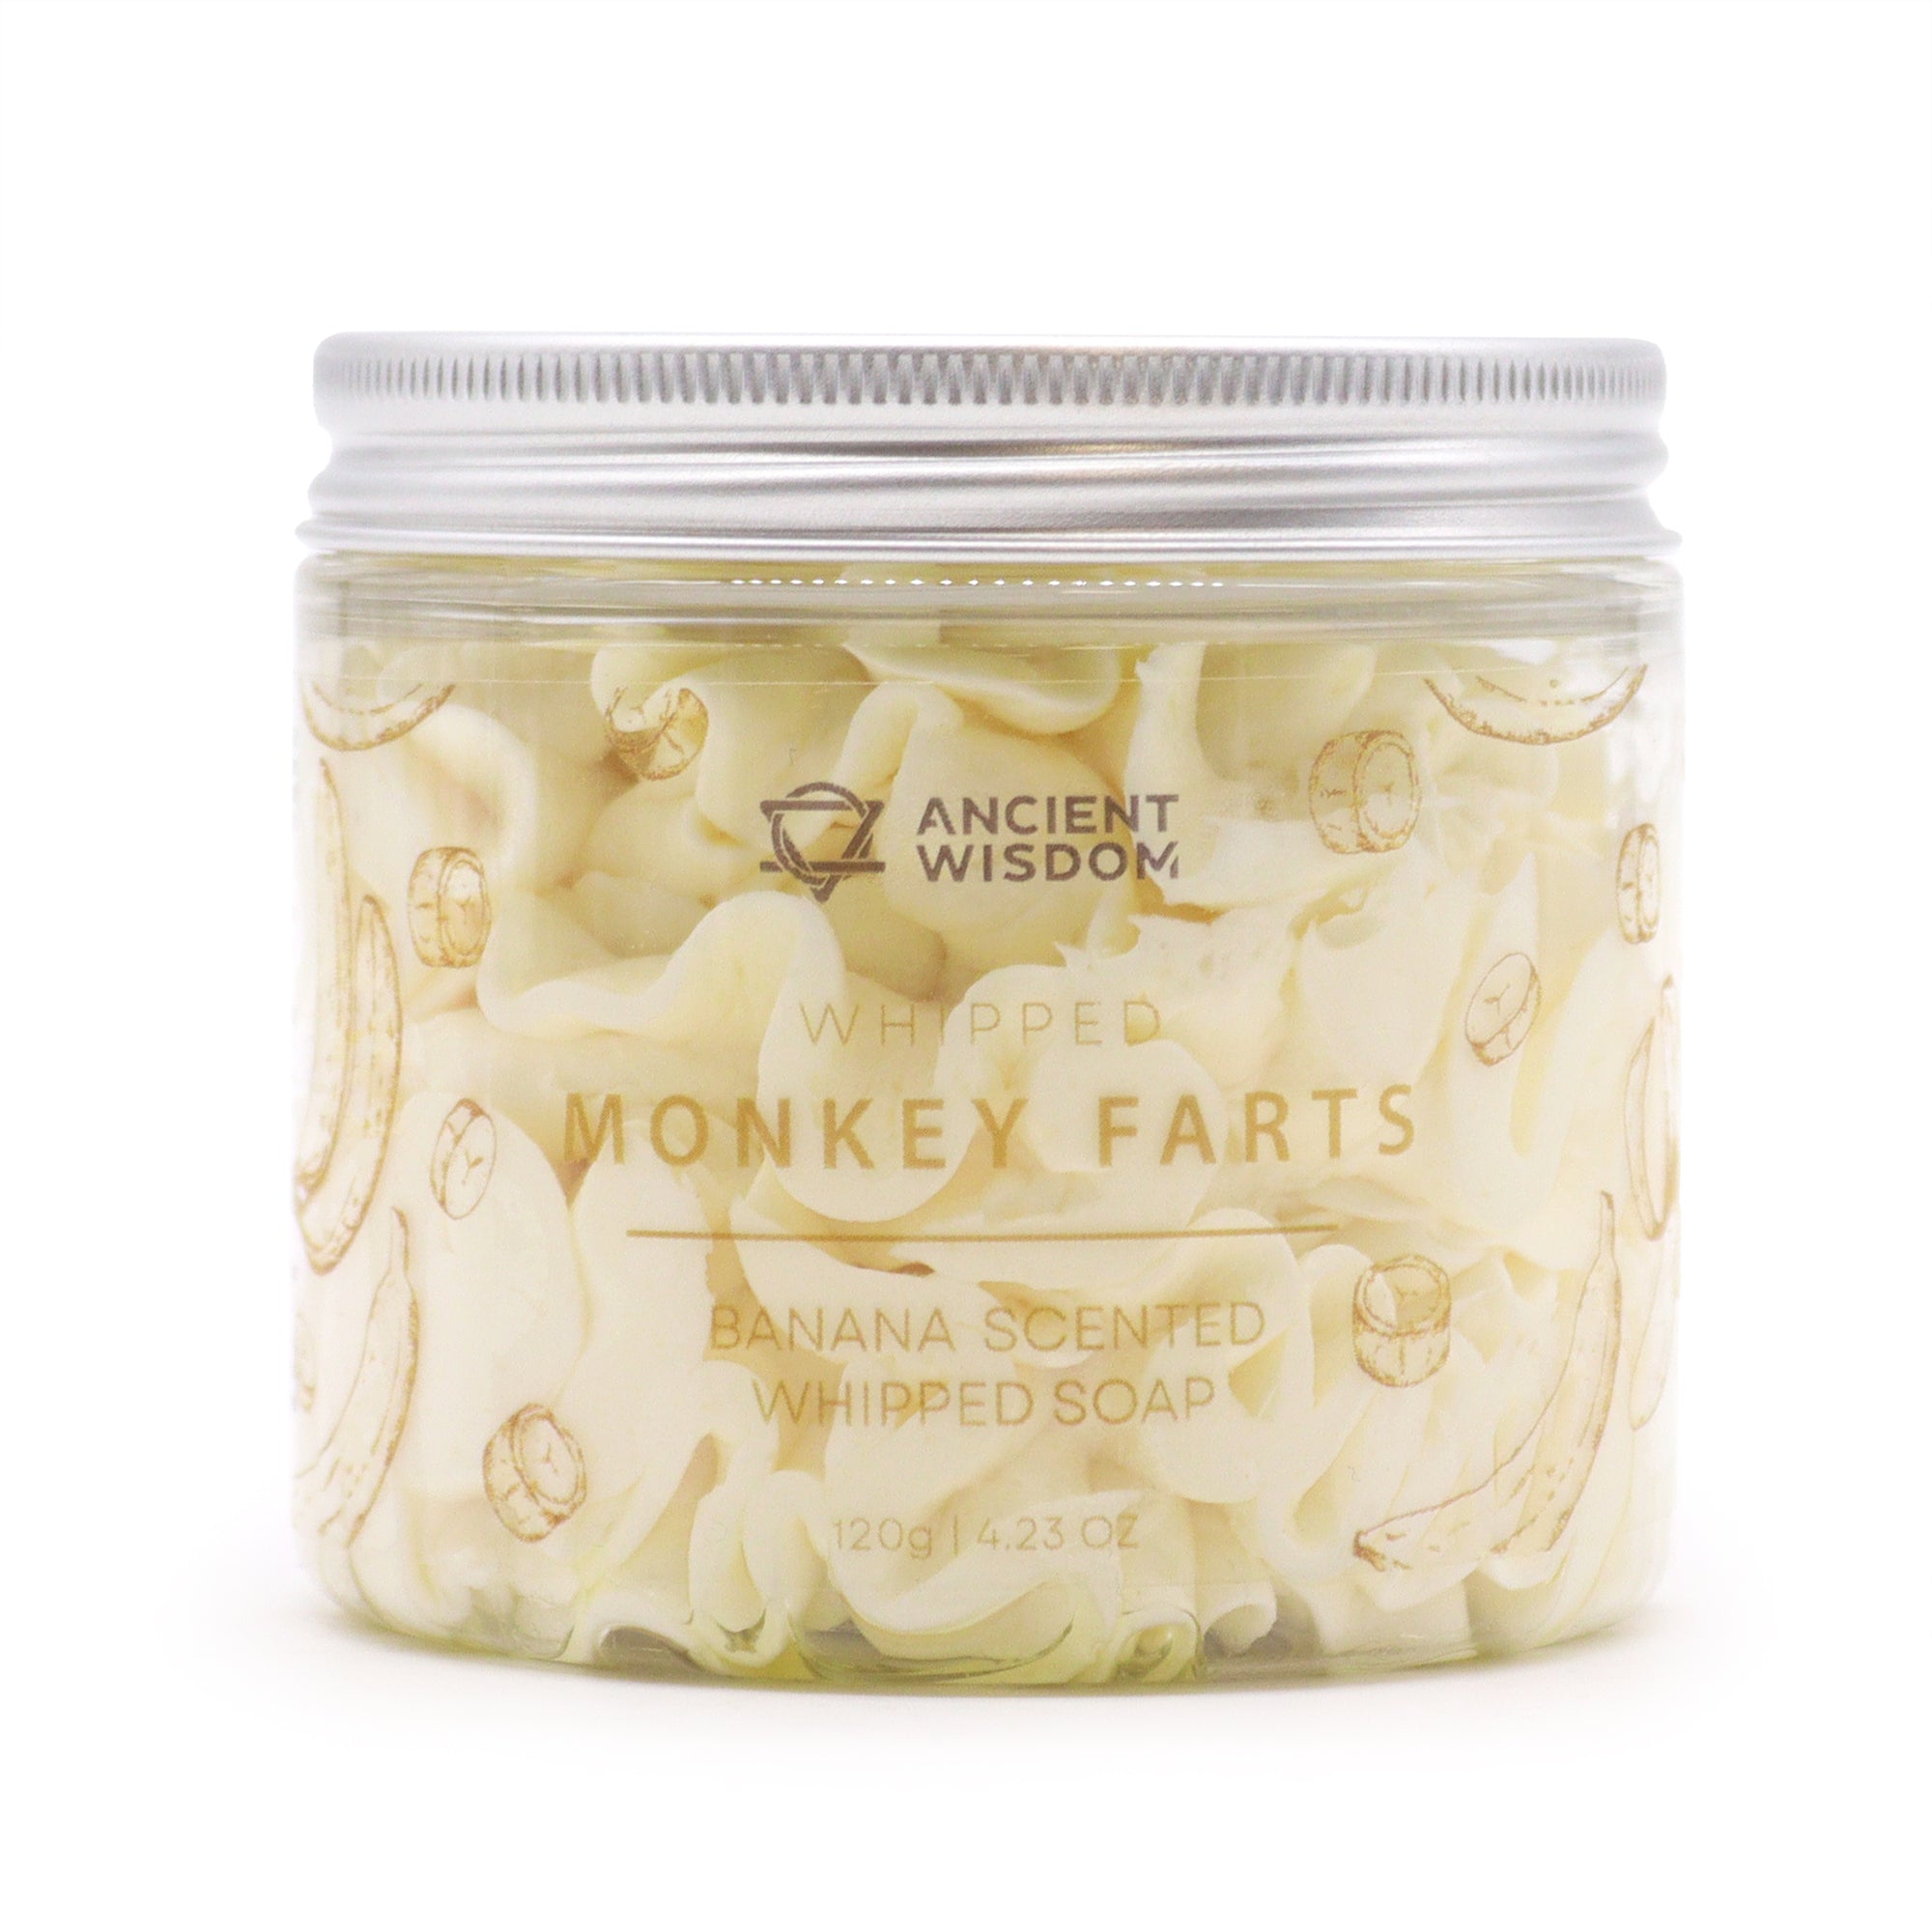 View Banana Whipped Cream Soap 120g information